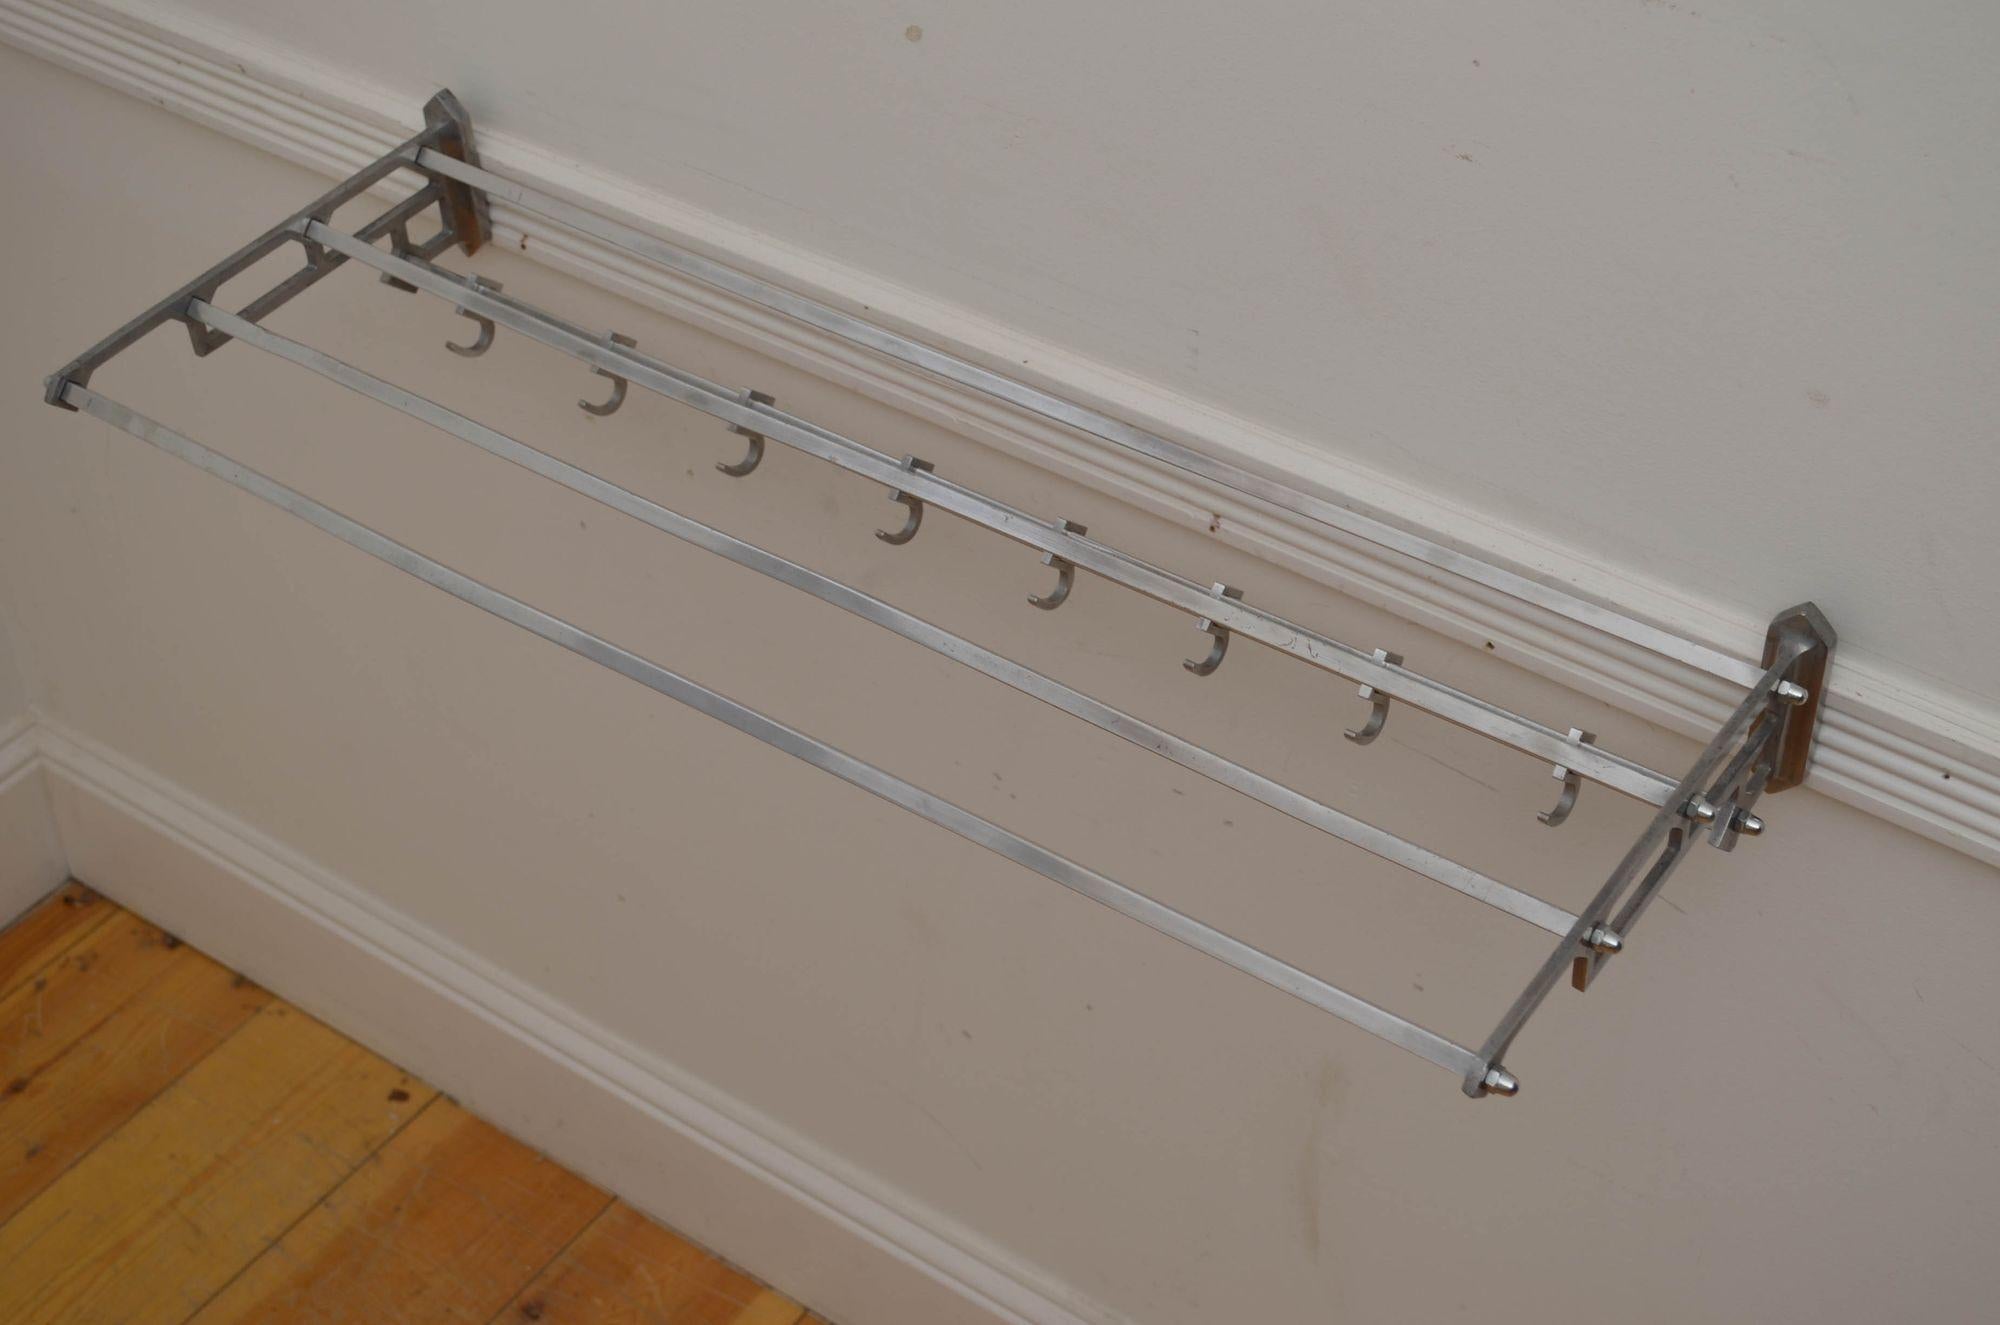 P0276 Stylish Bauhaus design, train style coat rack with a shelf, having eight adjustable hooks, four top shelf bars (with iron insets, making it very strong) and elegant stylized sides. This antique coat hook rack was cleaned and polished and is in